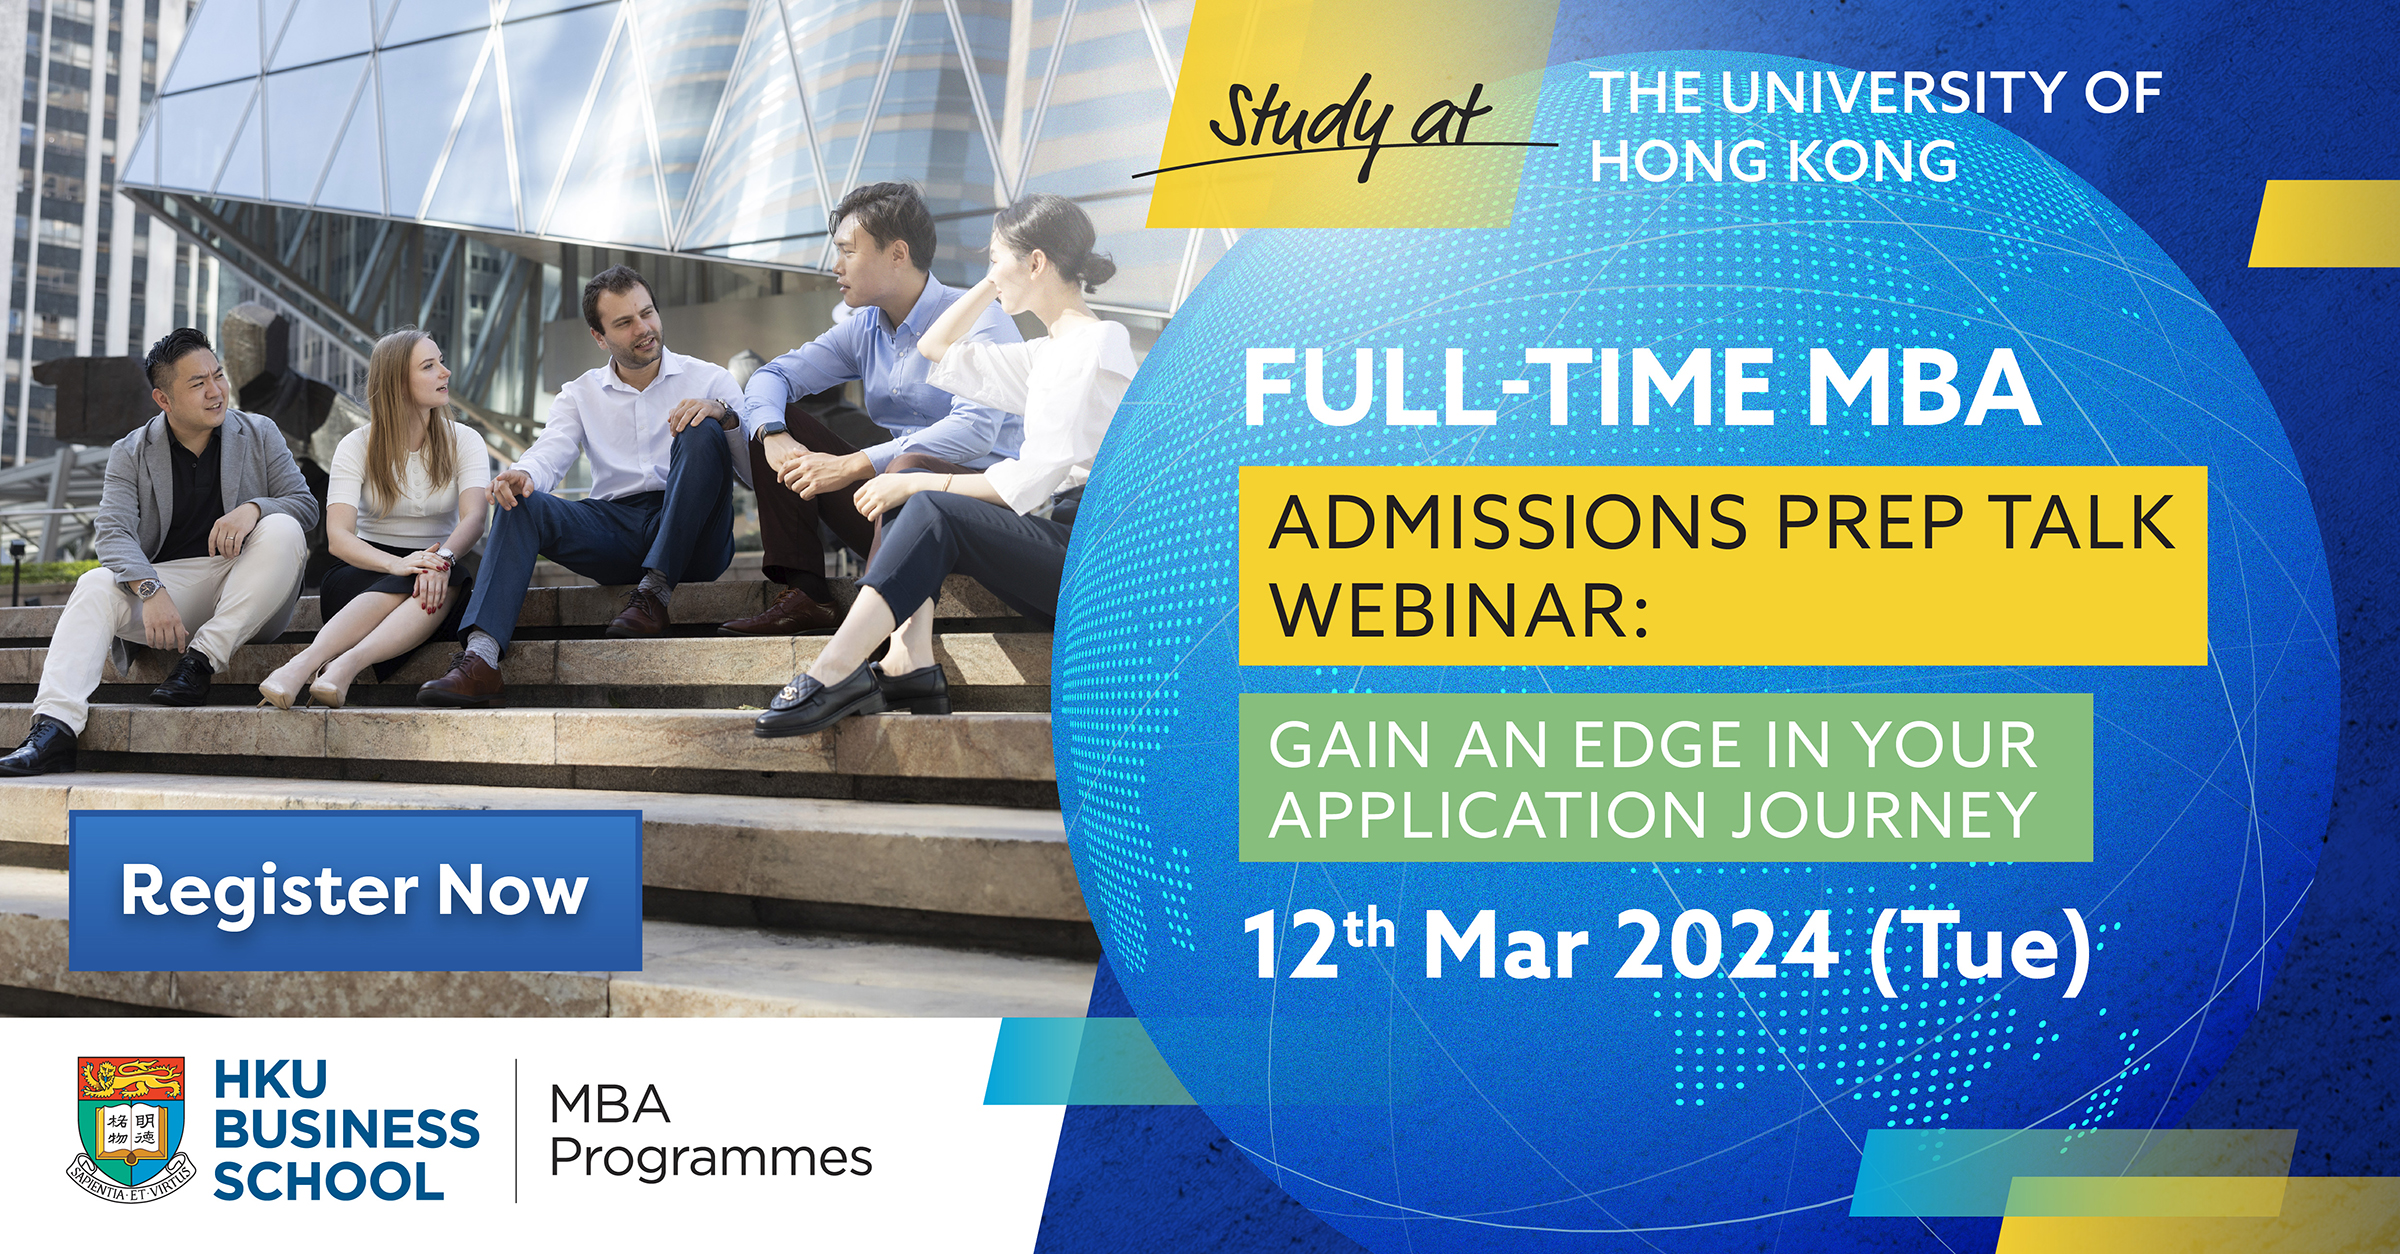 HKU MBA Admissions Prep Talk Webinar: Gain an Edge in Your Application Journey